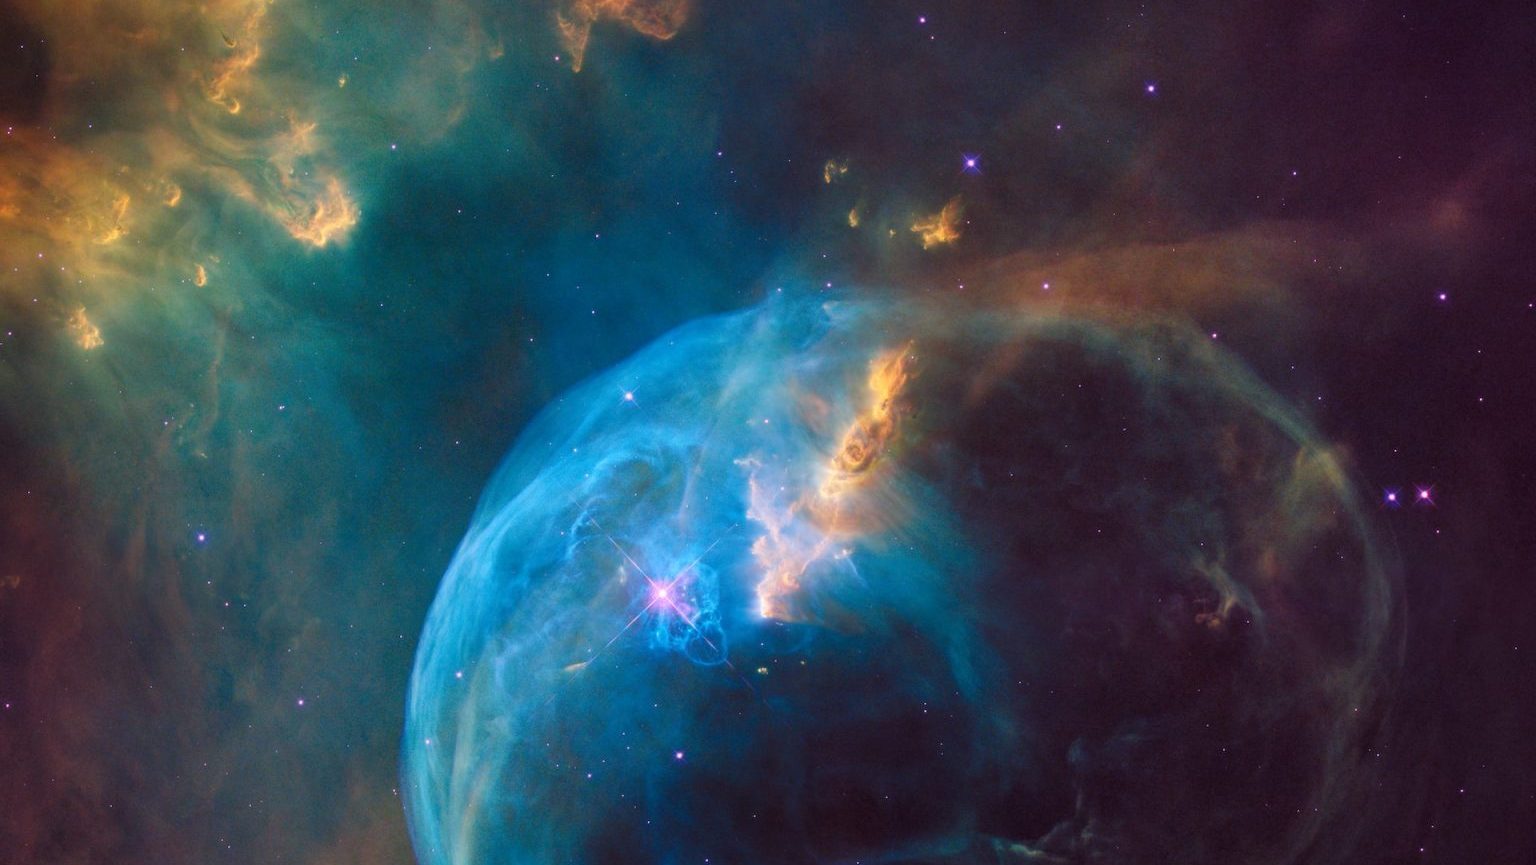 An image of a blue nebula in space.